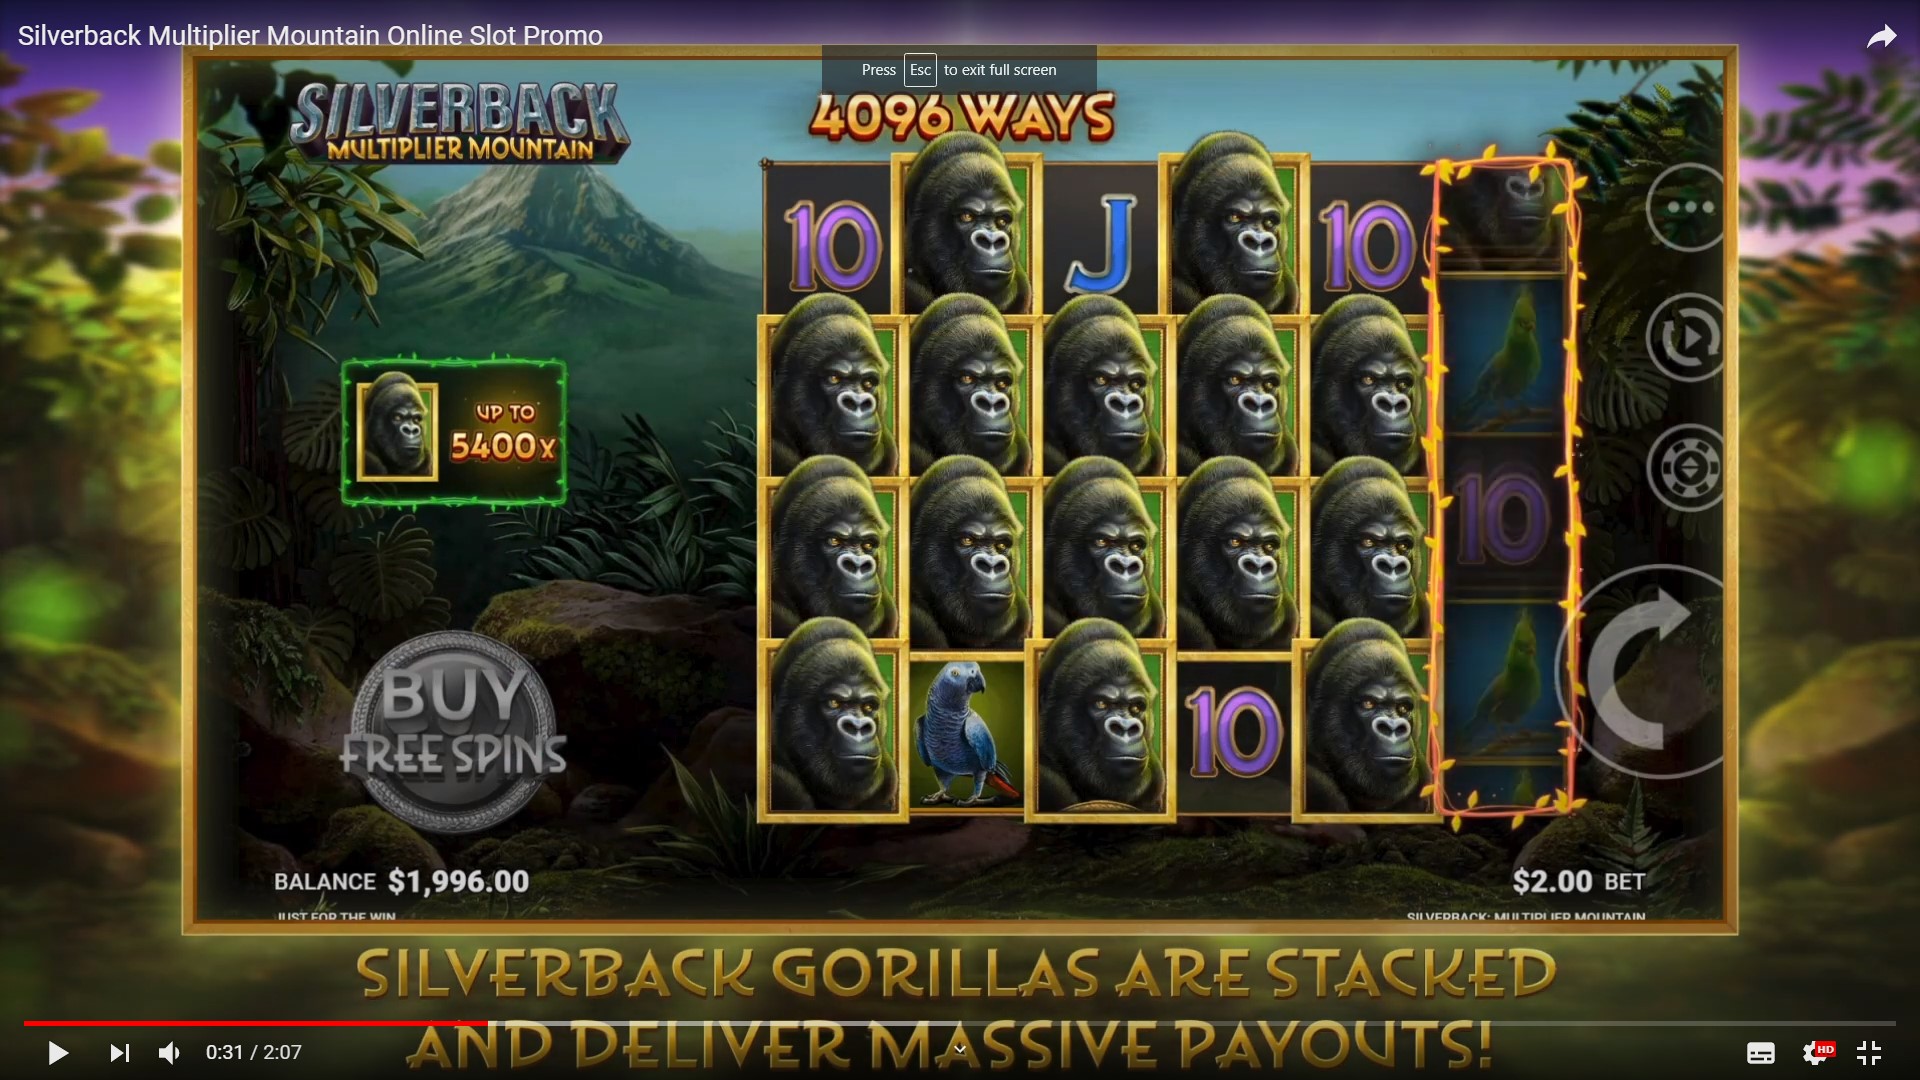 Silverback Multiplier Mountain feature Just For The Win